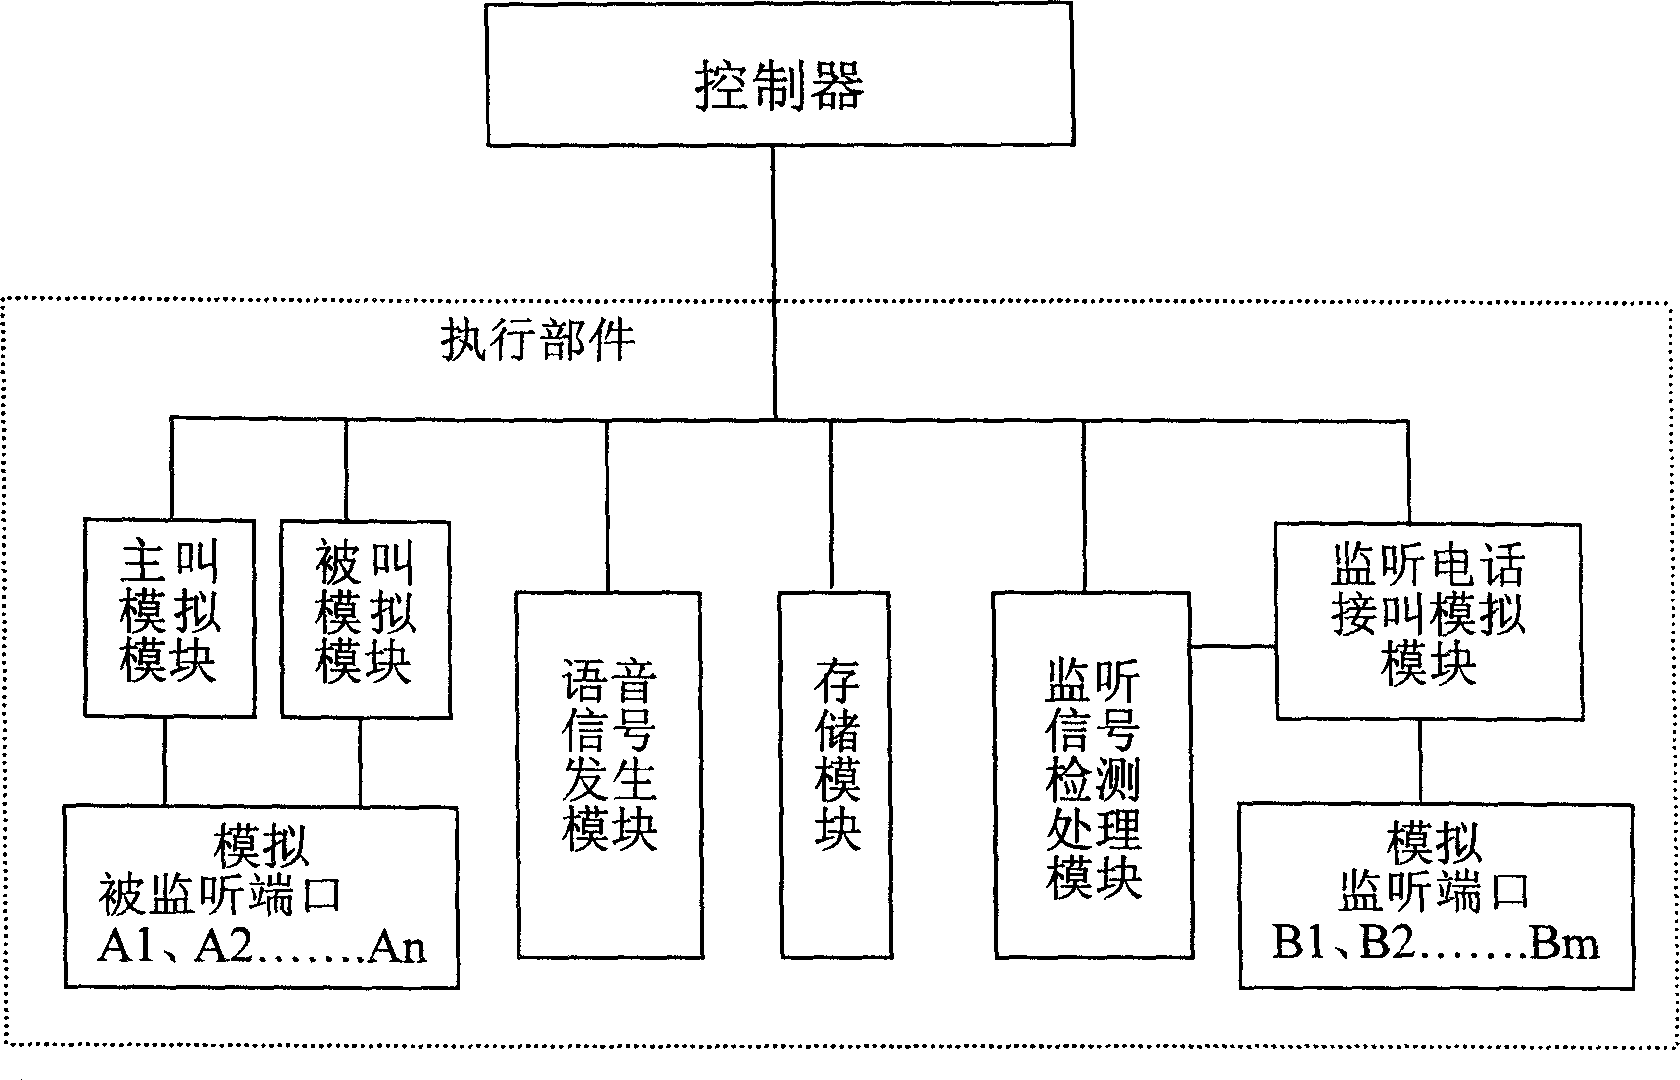 Device for automatically testing and monitoring network gate characteristics